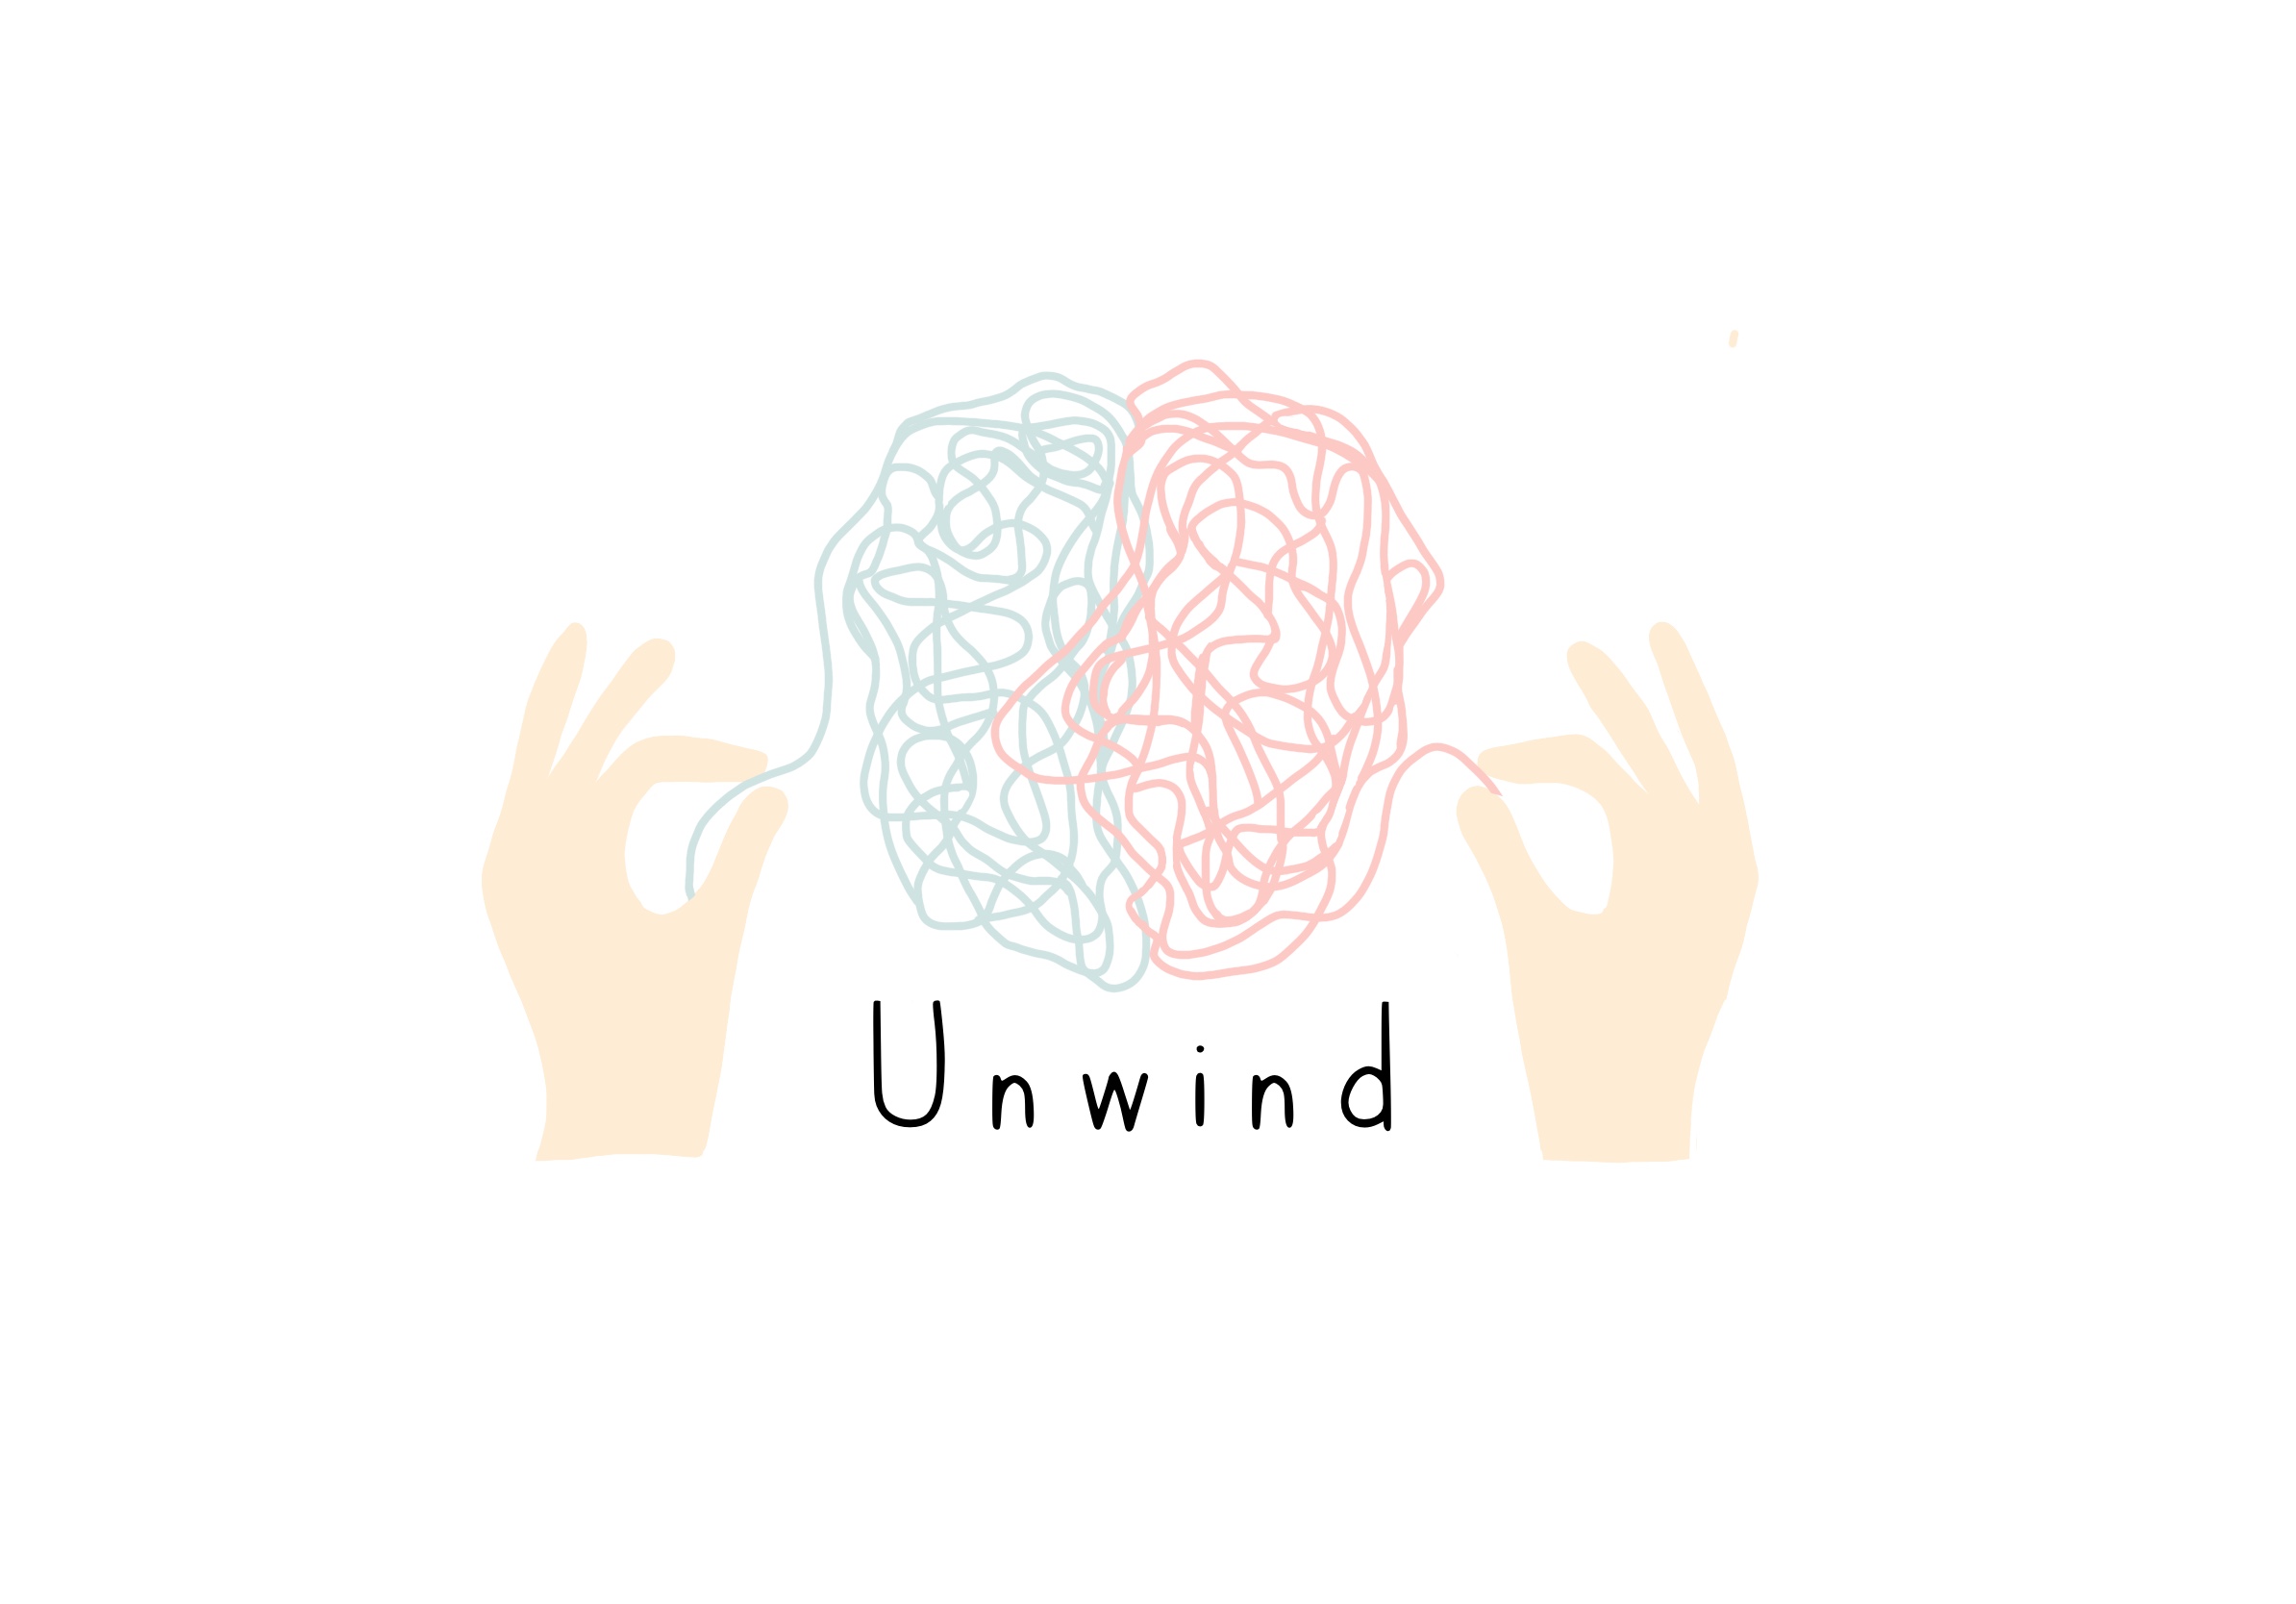 Unwind - Interactive Group Project